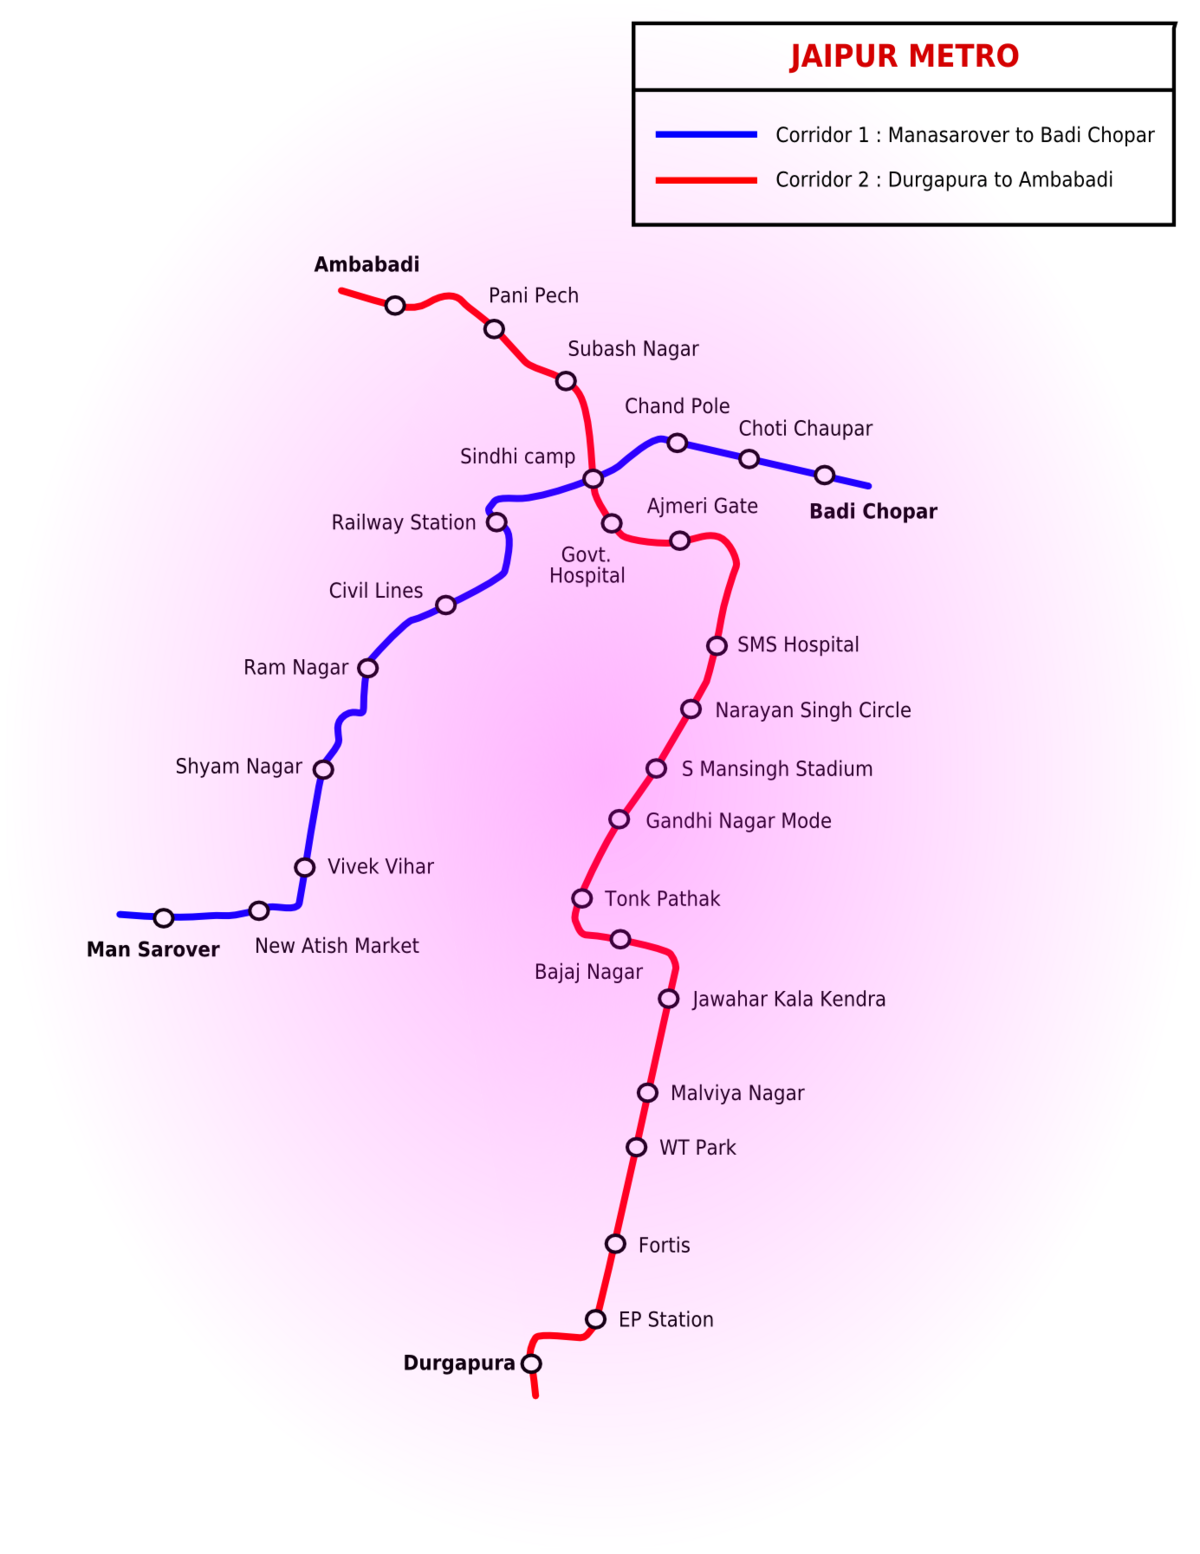 Map of Jaipur Metro created using Inkscape.png